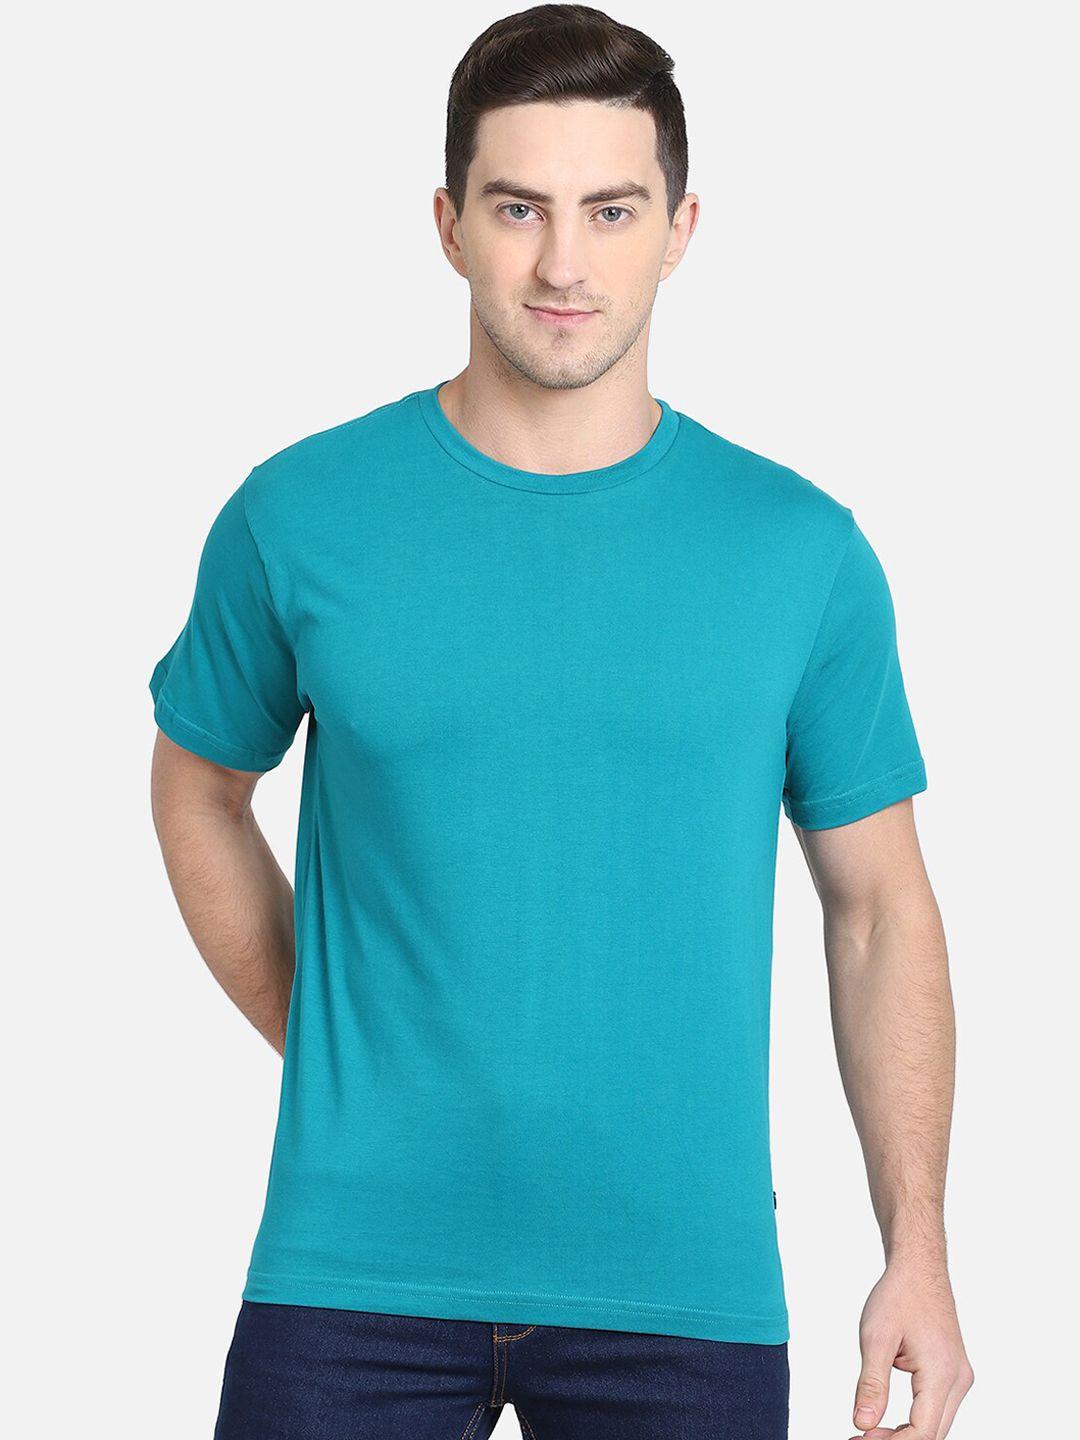 proteens men teal solid round neck t-shirt